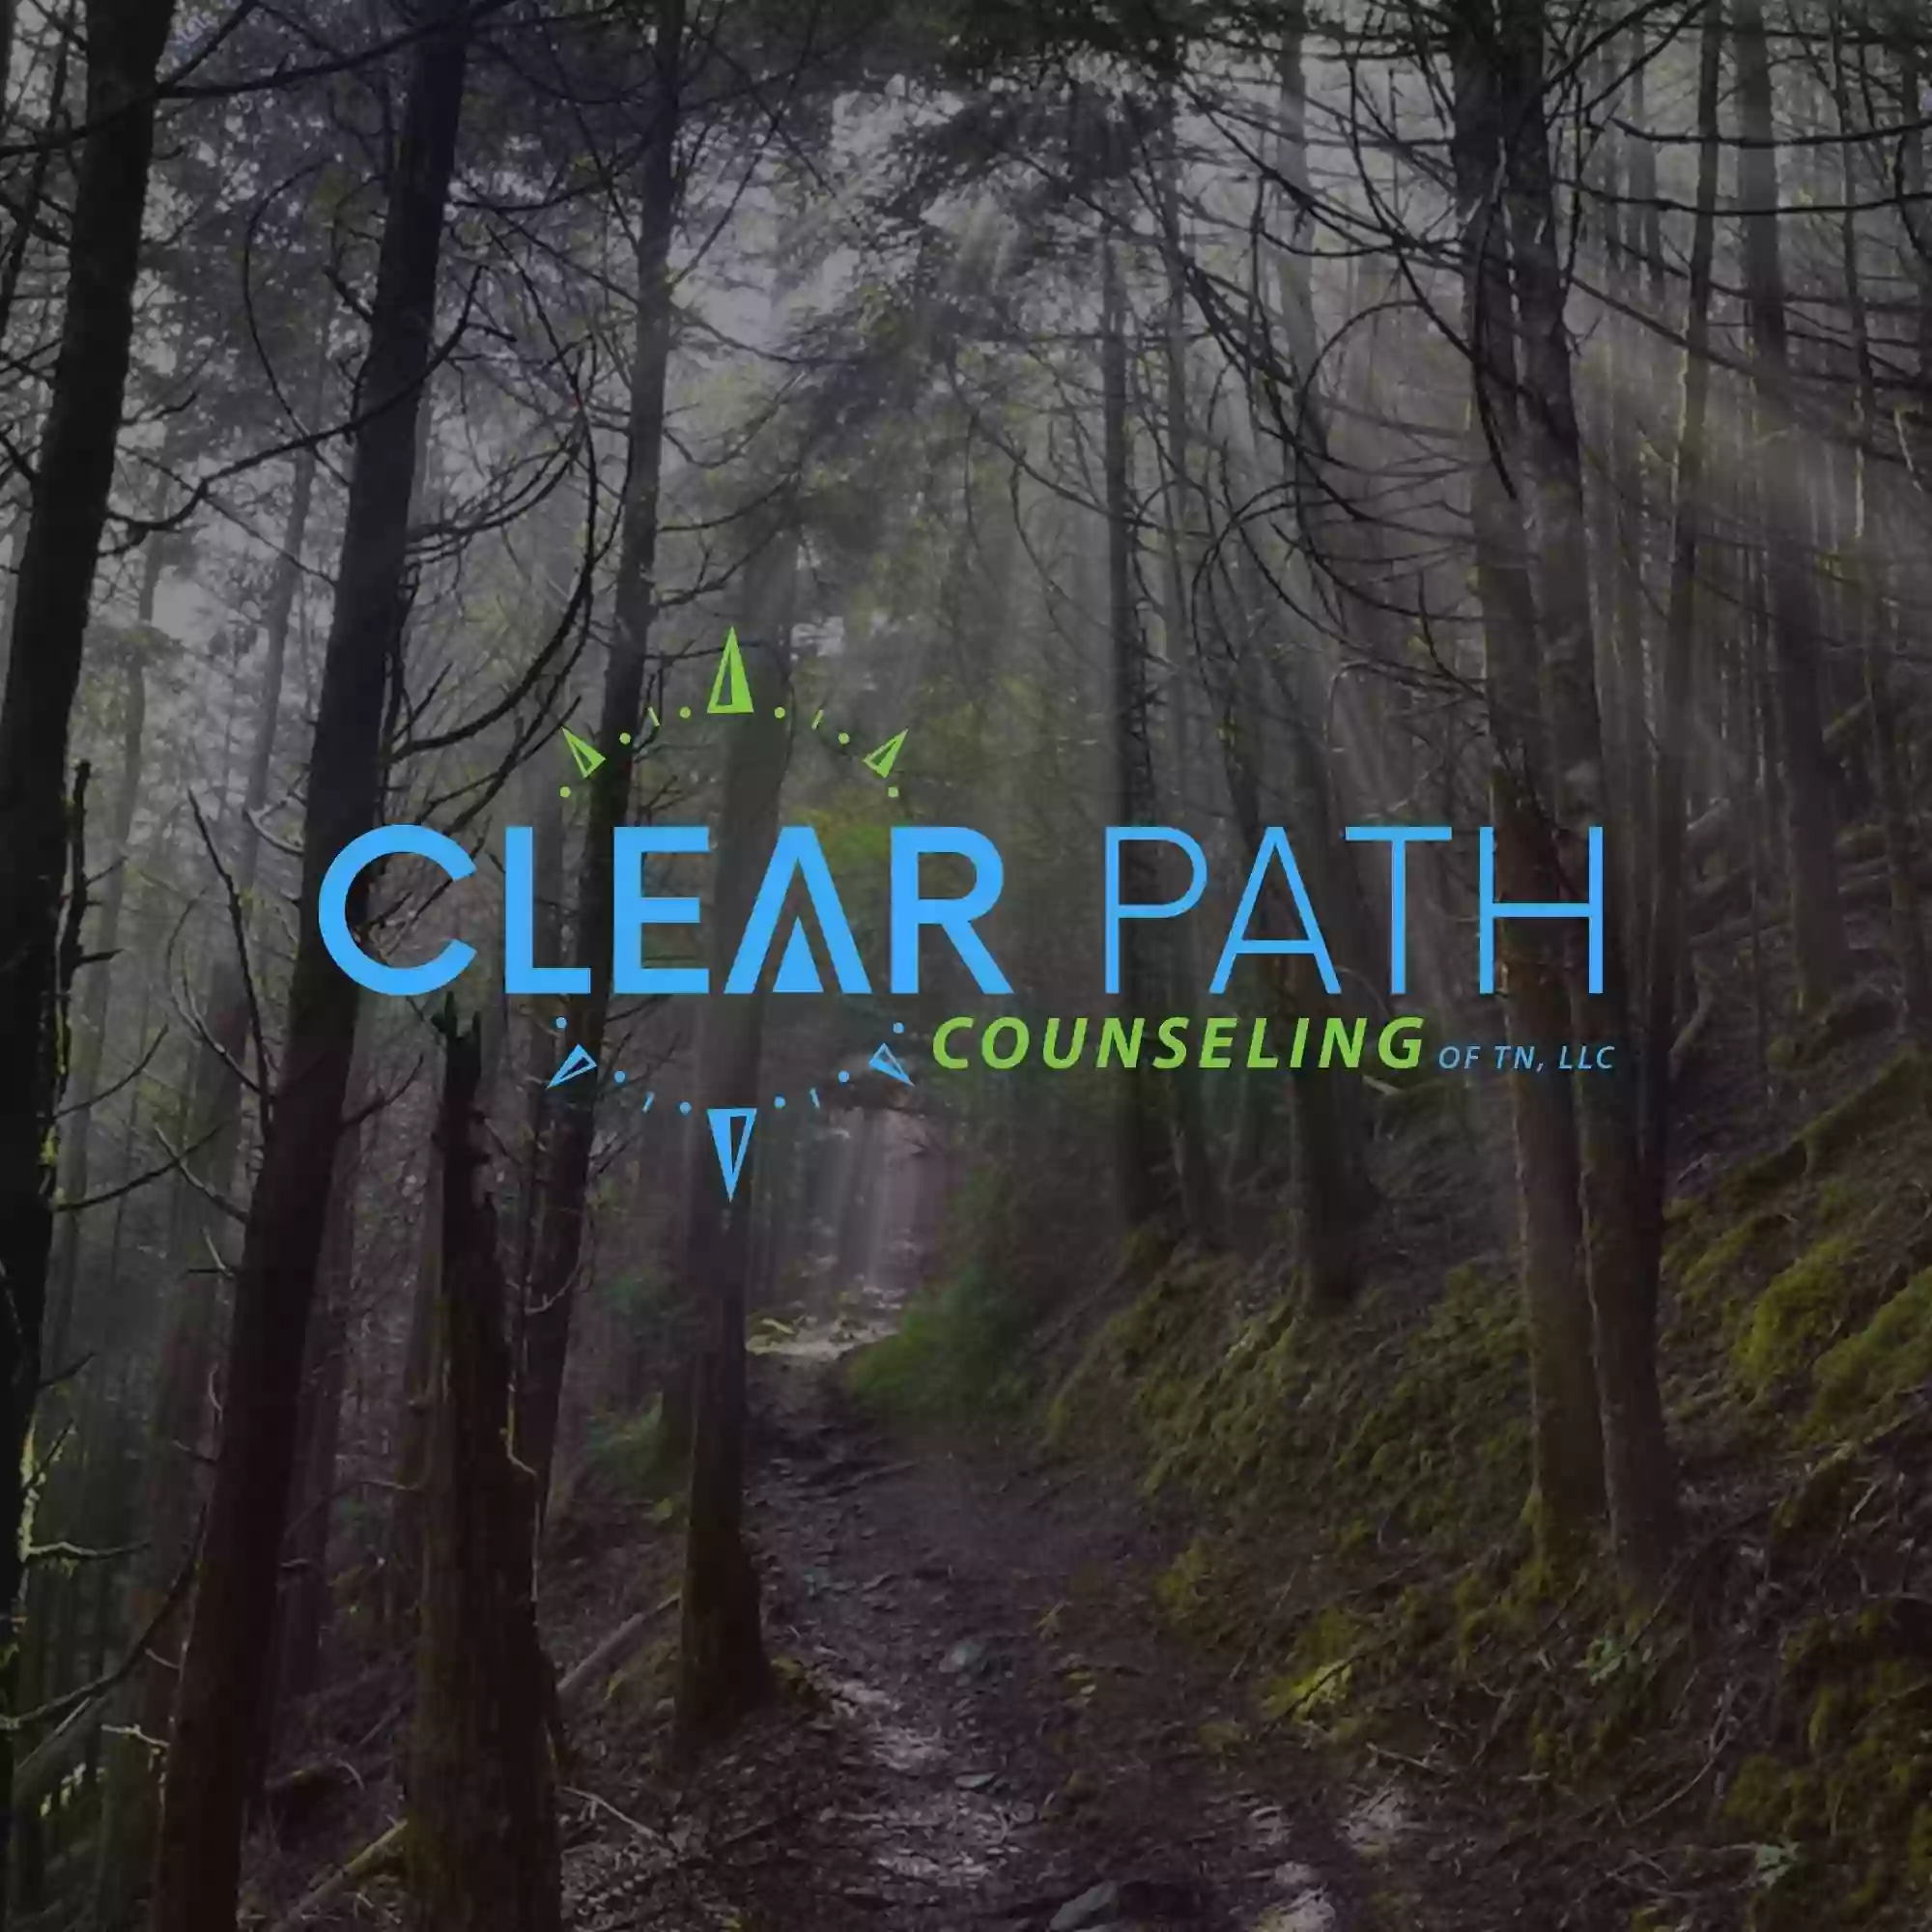 Clear Path Counseling of TN, LLC